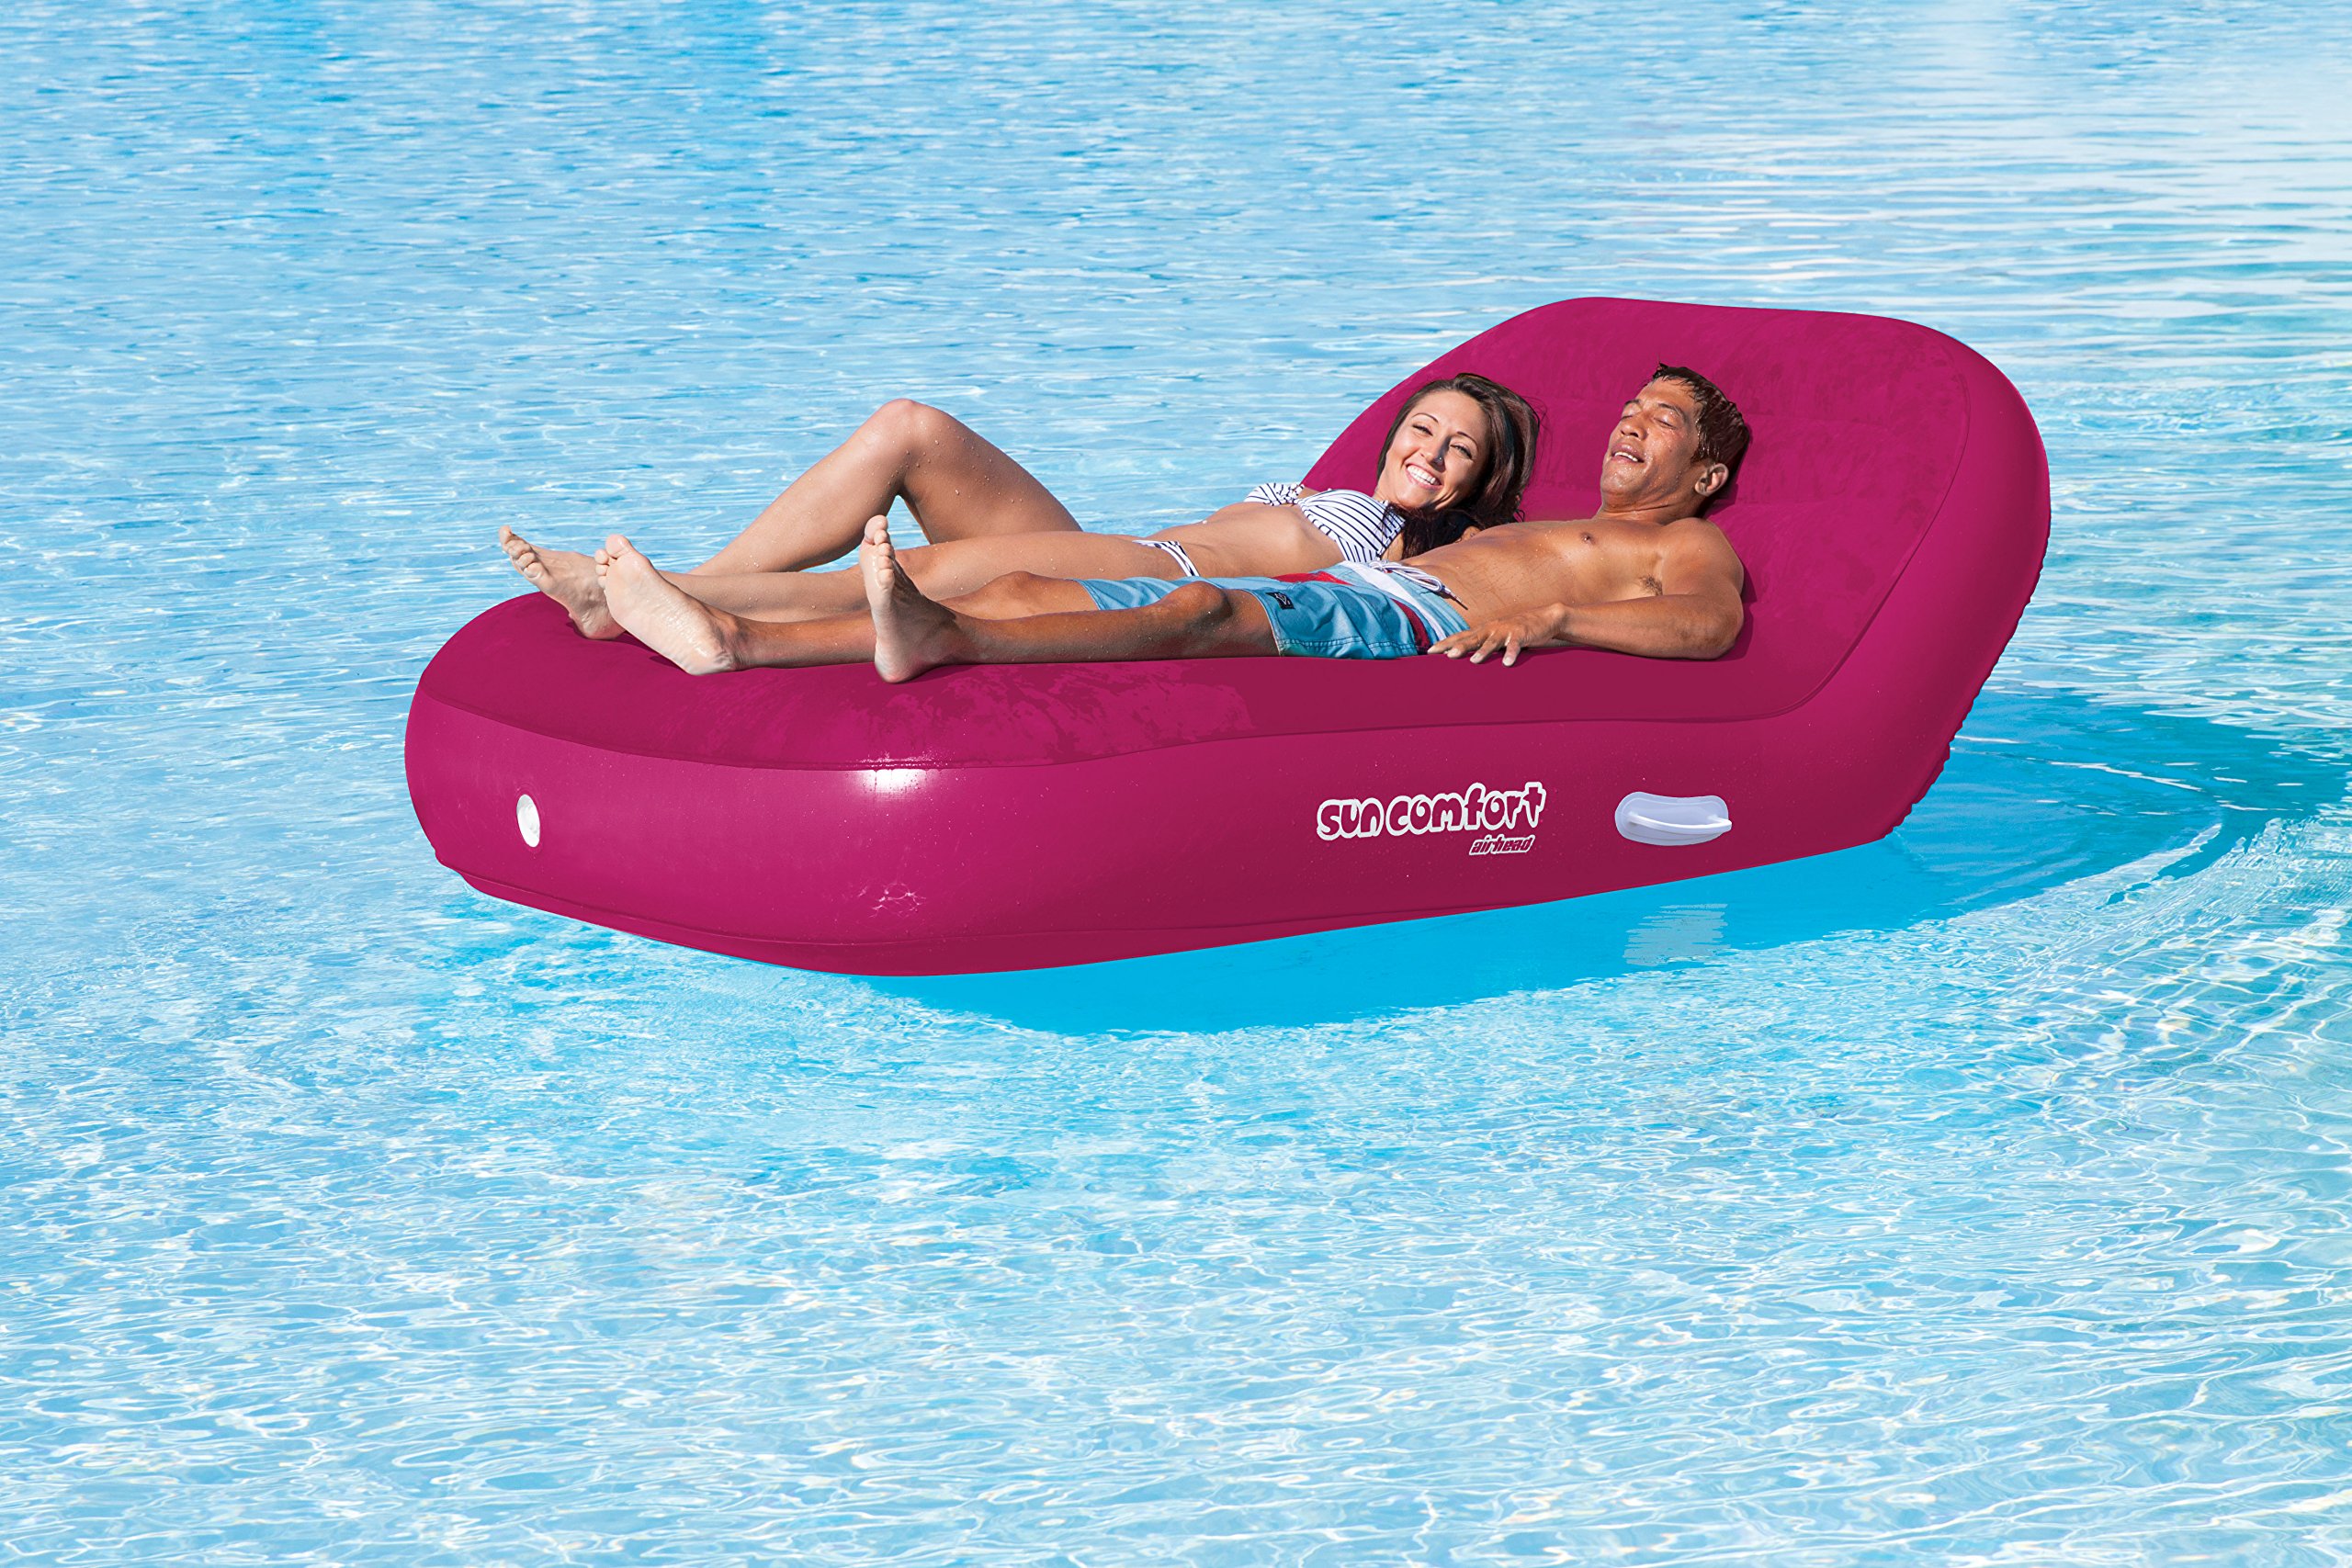 Airhead Sun Comfort Cool Suede Double Chaise Lounge Pool Float, Lake Chair